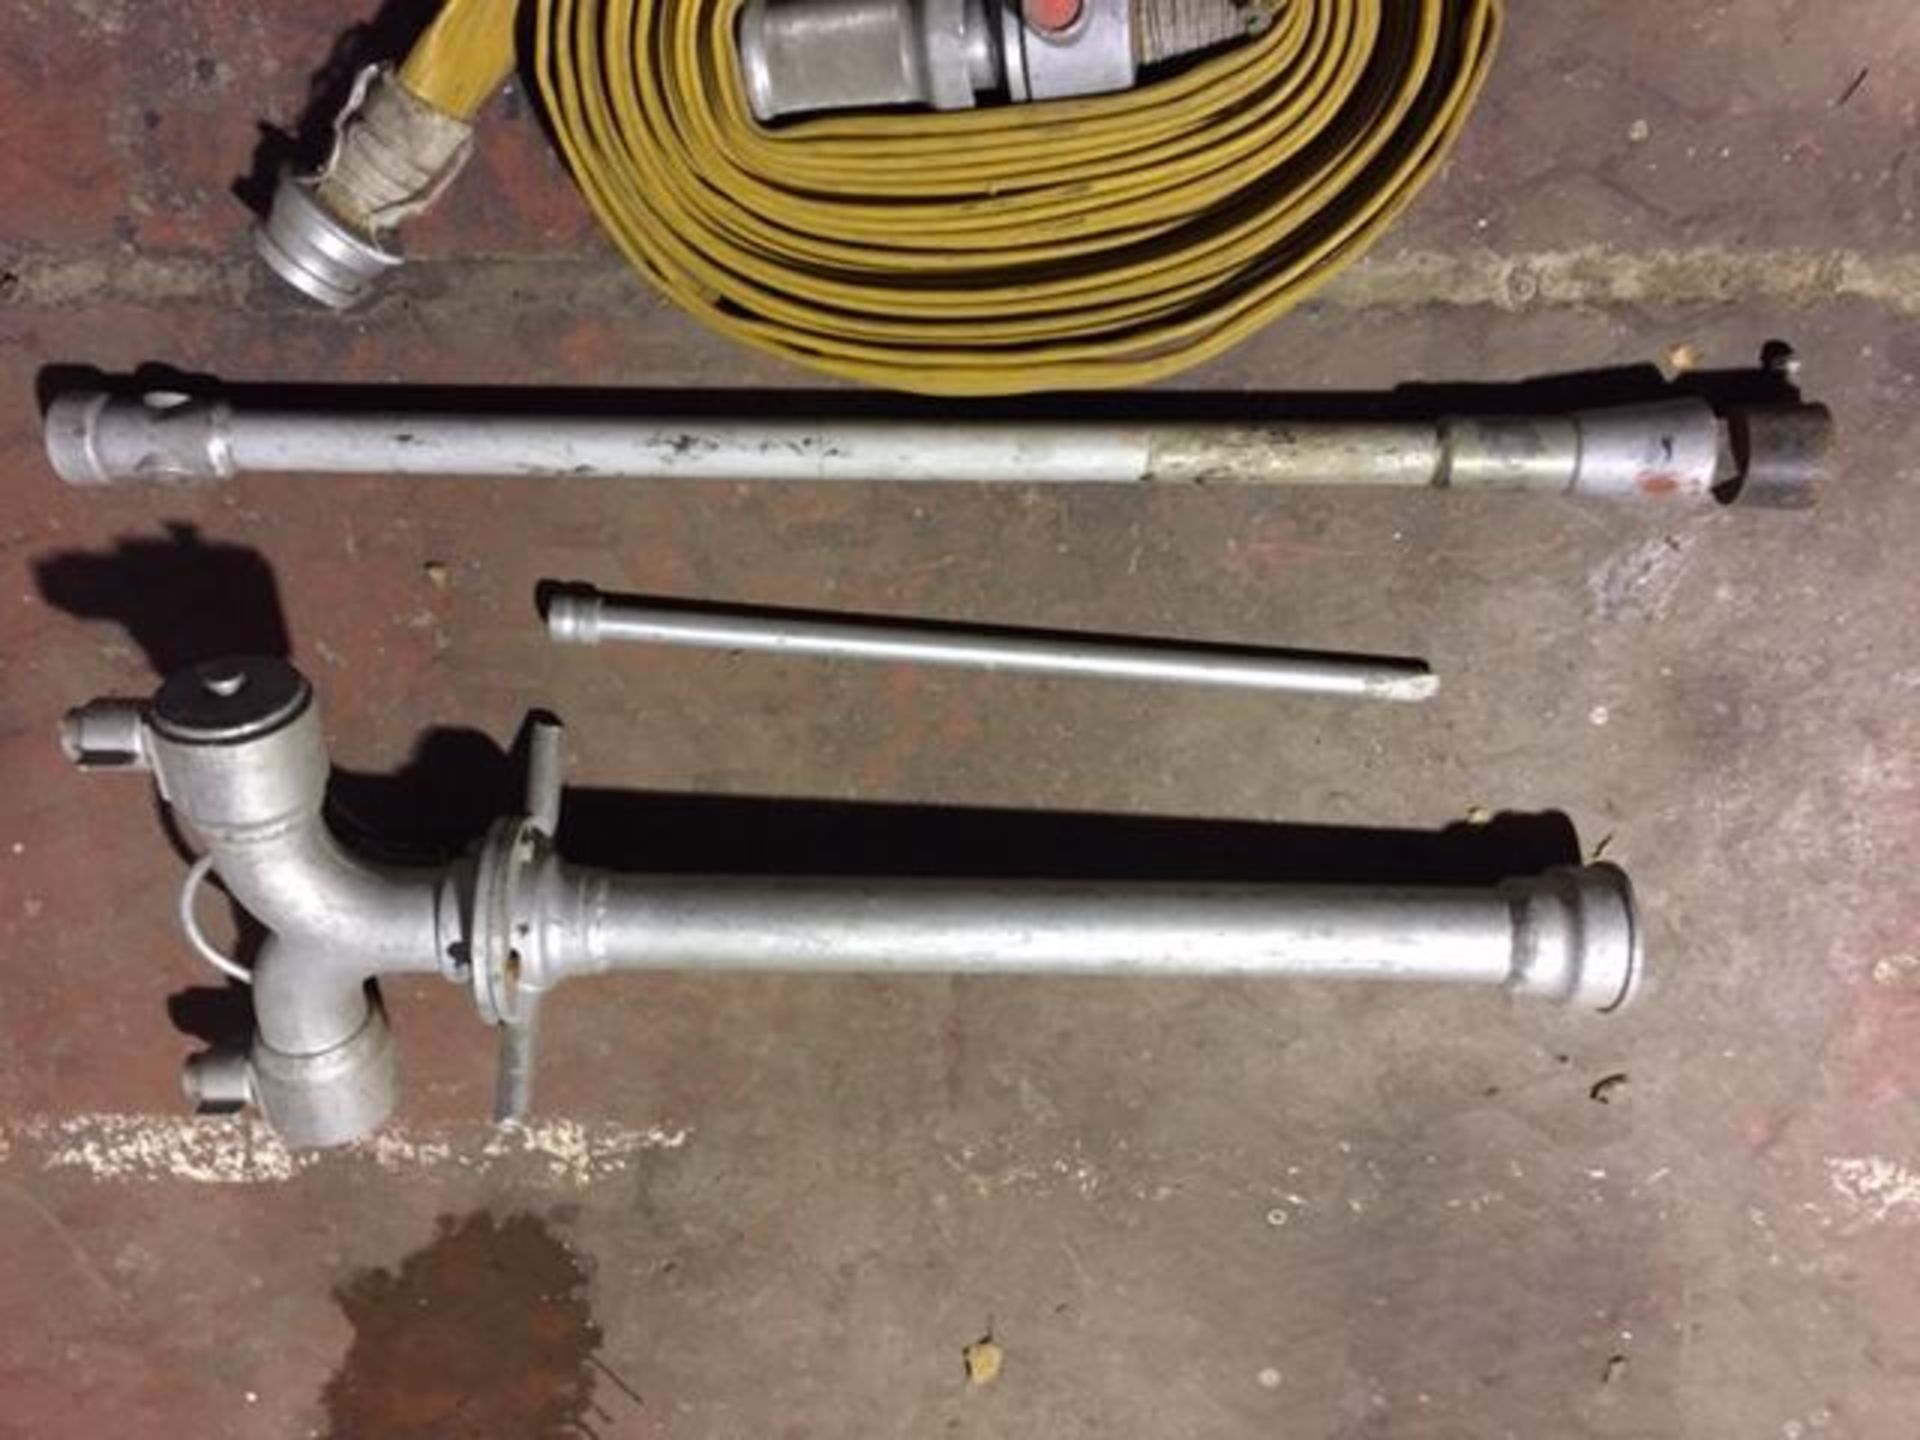 Water hydrant hose kit - Image 5 of 5